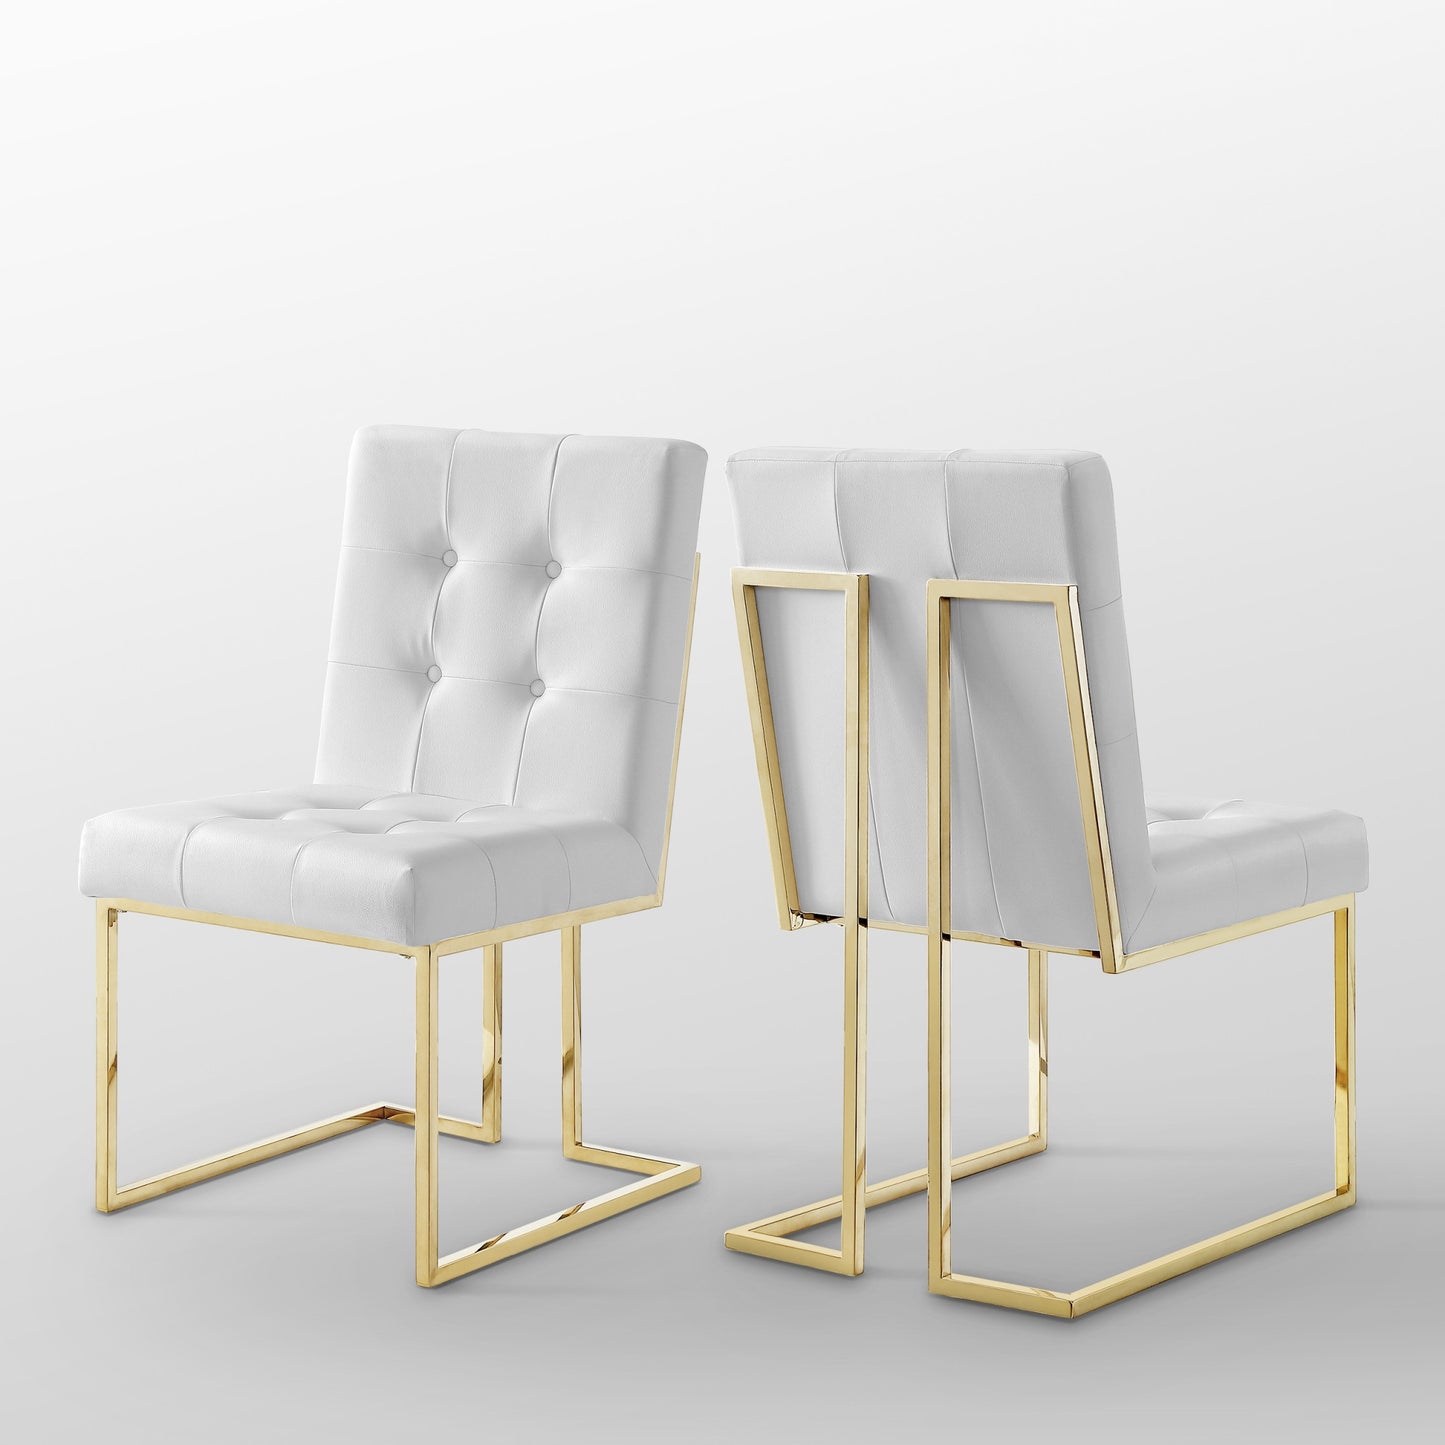 Set of Two Tufted White and Gold Upholstered Faux Leather Dining Side Chairs